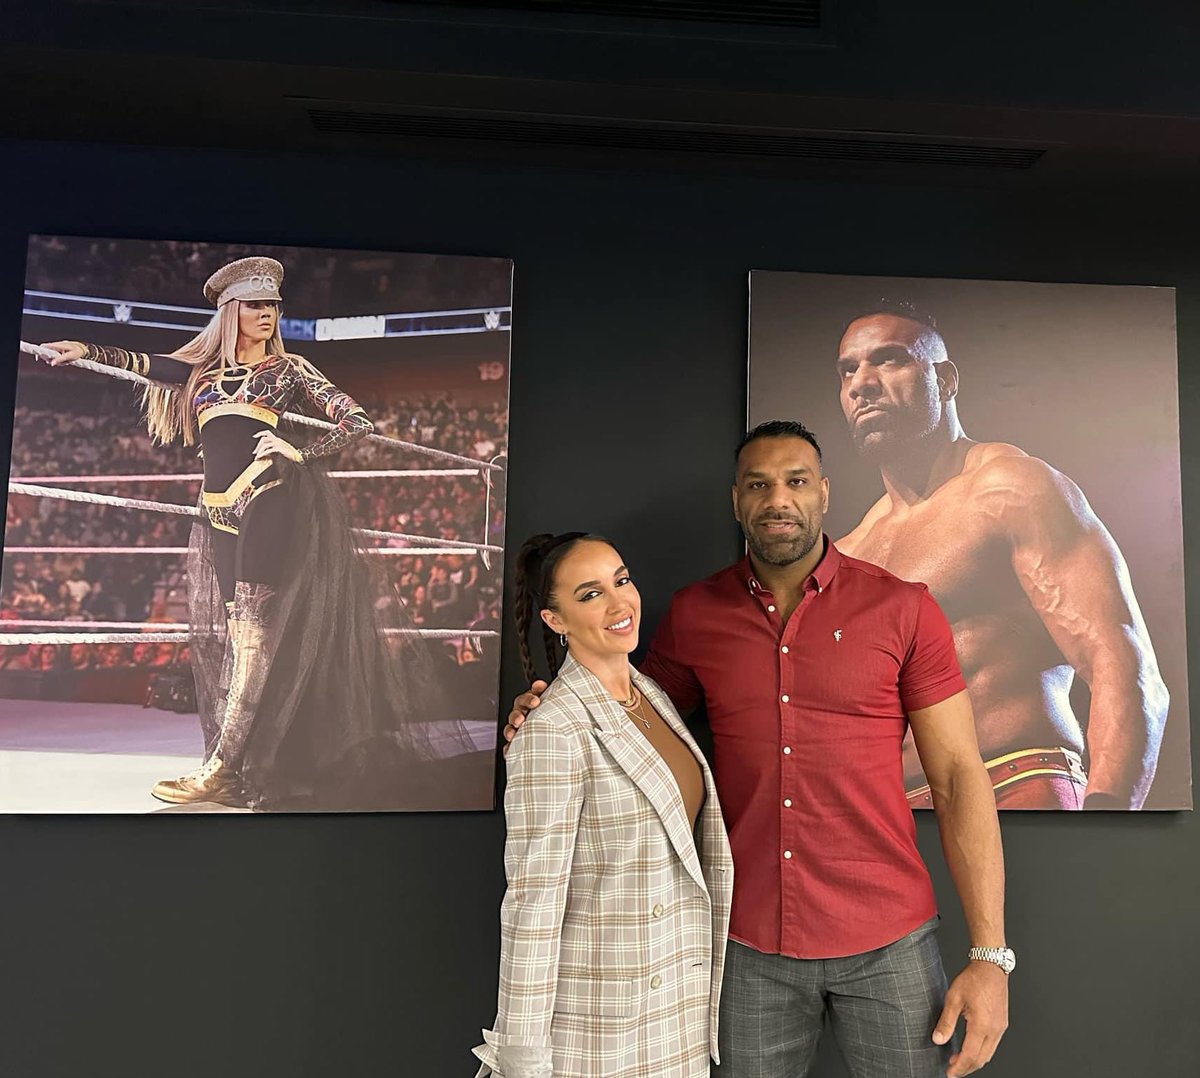 From Canadian indies ➪ breaking my collarbone in India ➪ every city imaginable with WWE… there’s no better person to do it alongside. @JinderMahal I’d say ‘Goodluck’… but you don’t need it, Comeback King 🇨🇦♥️🙌🏼